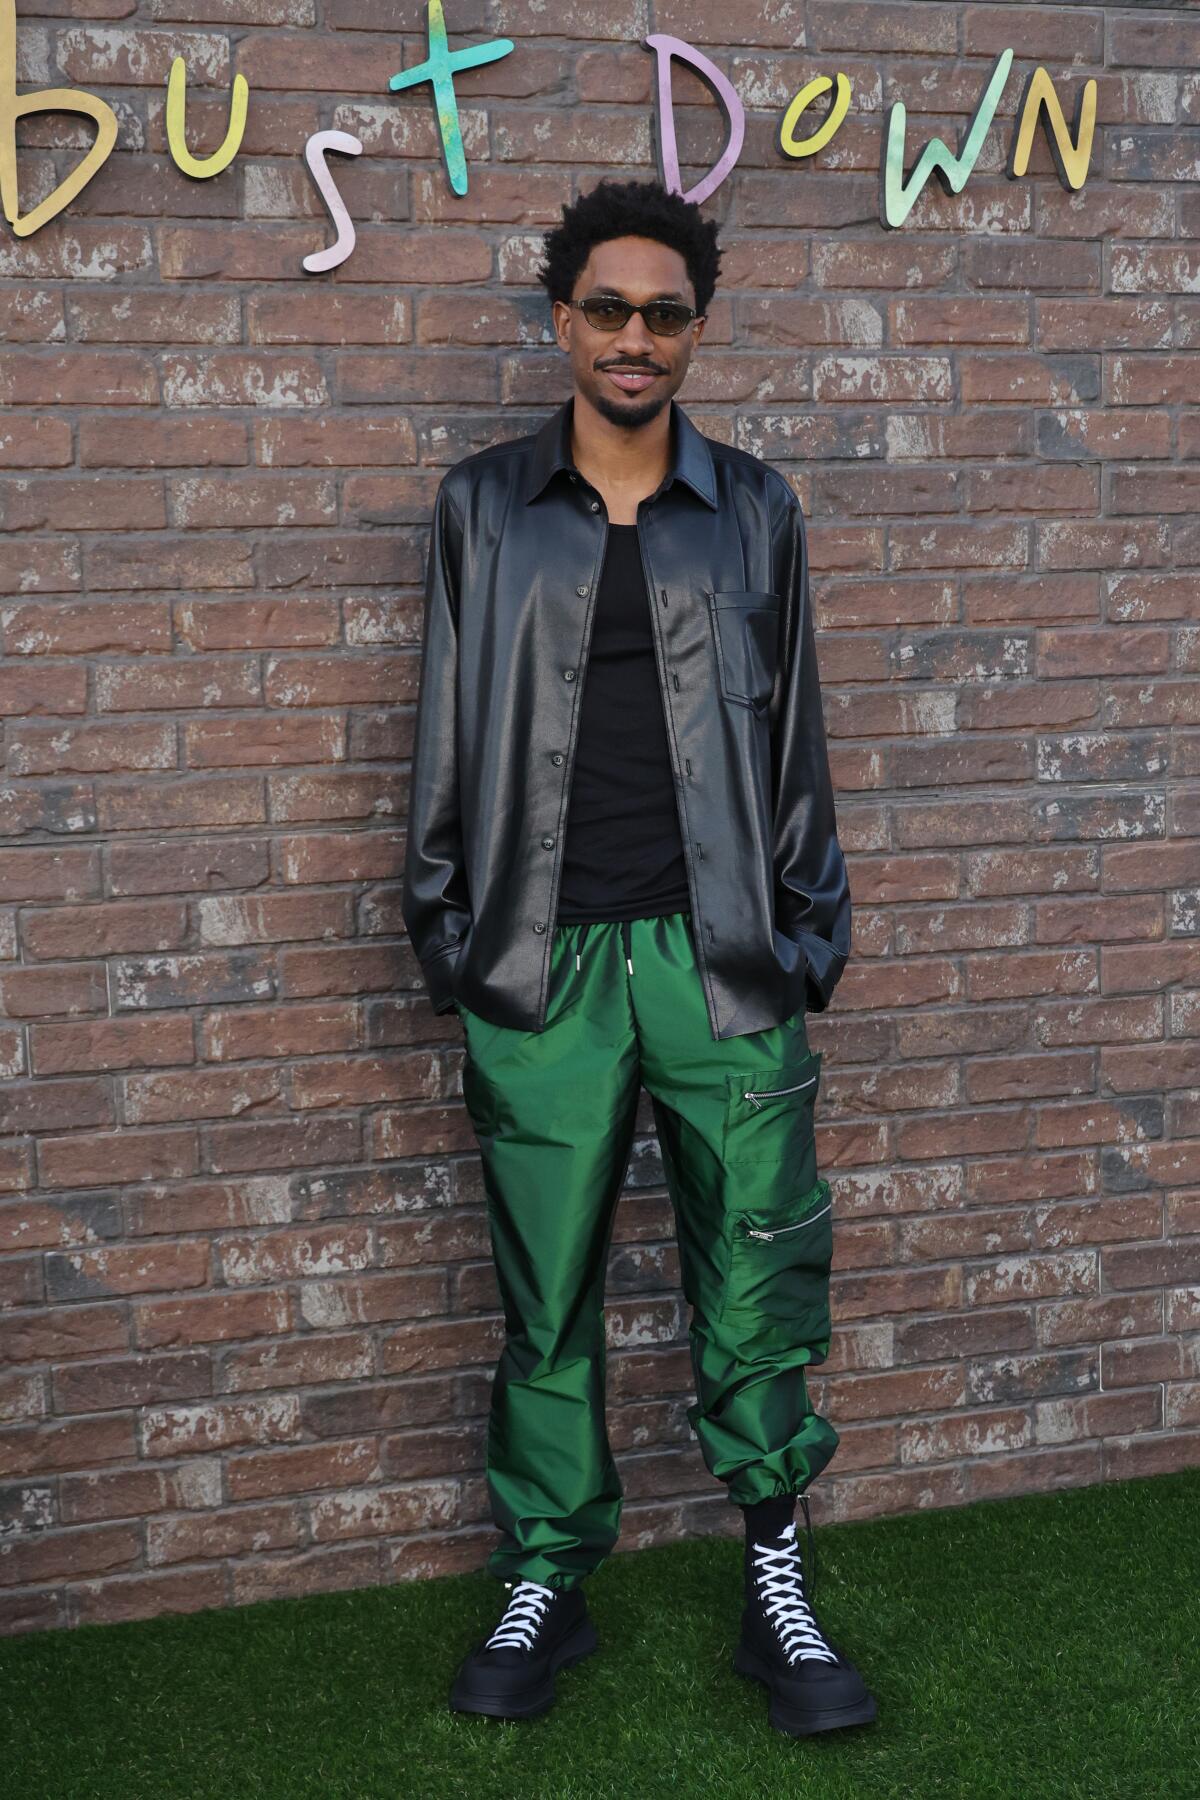 A smiling man in sunglasses, a black jacket and green pants stands in front of a brick wall.